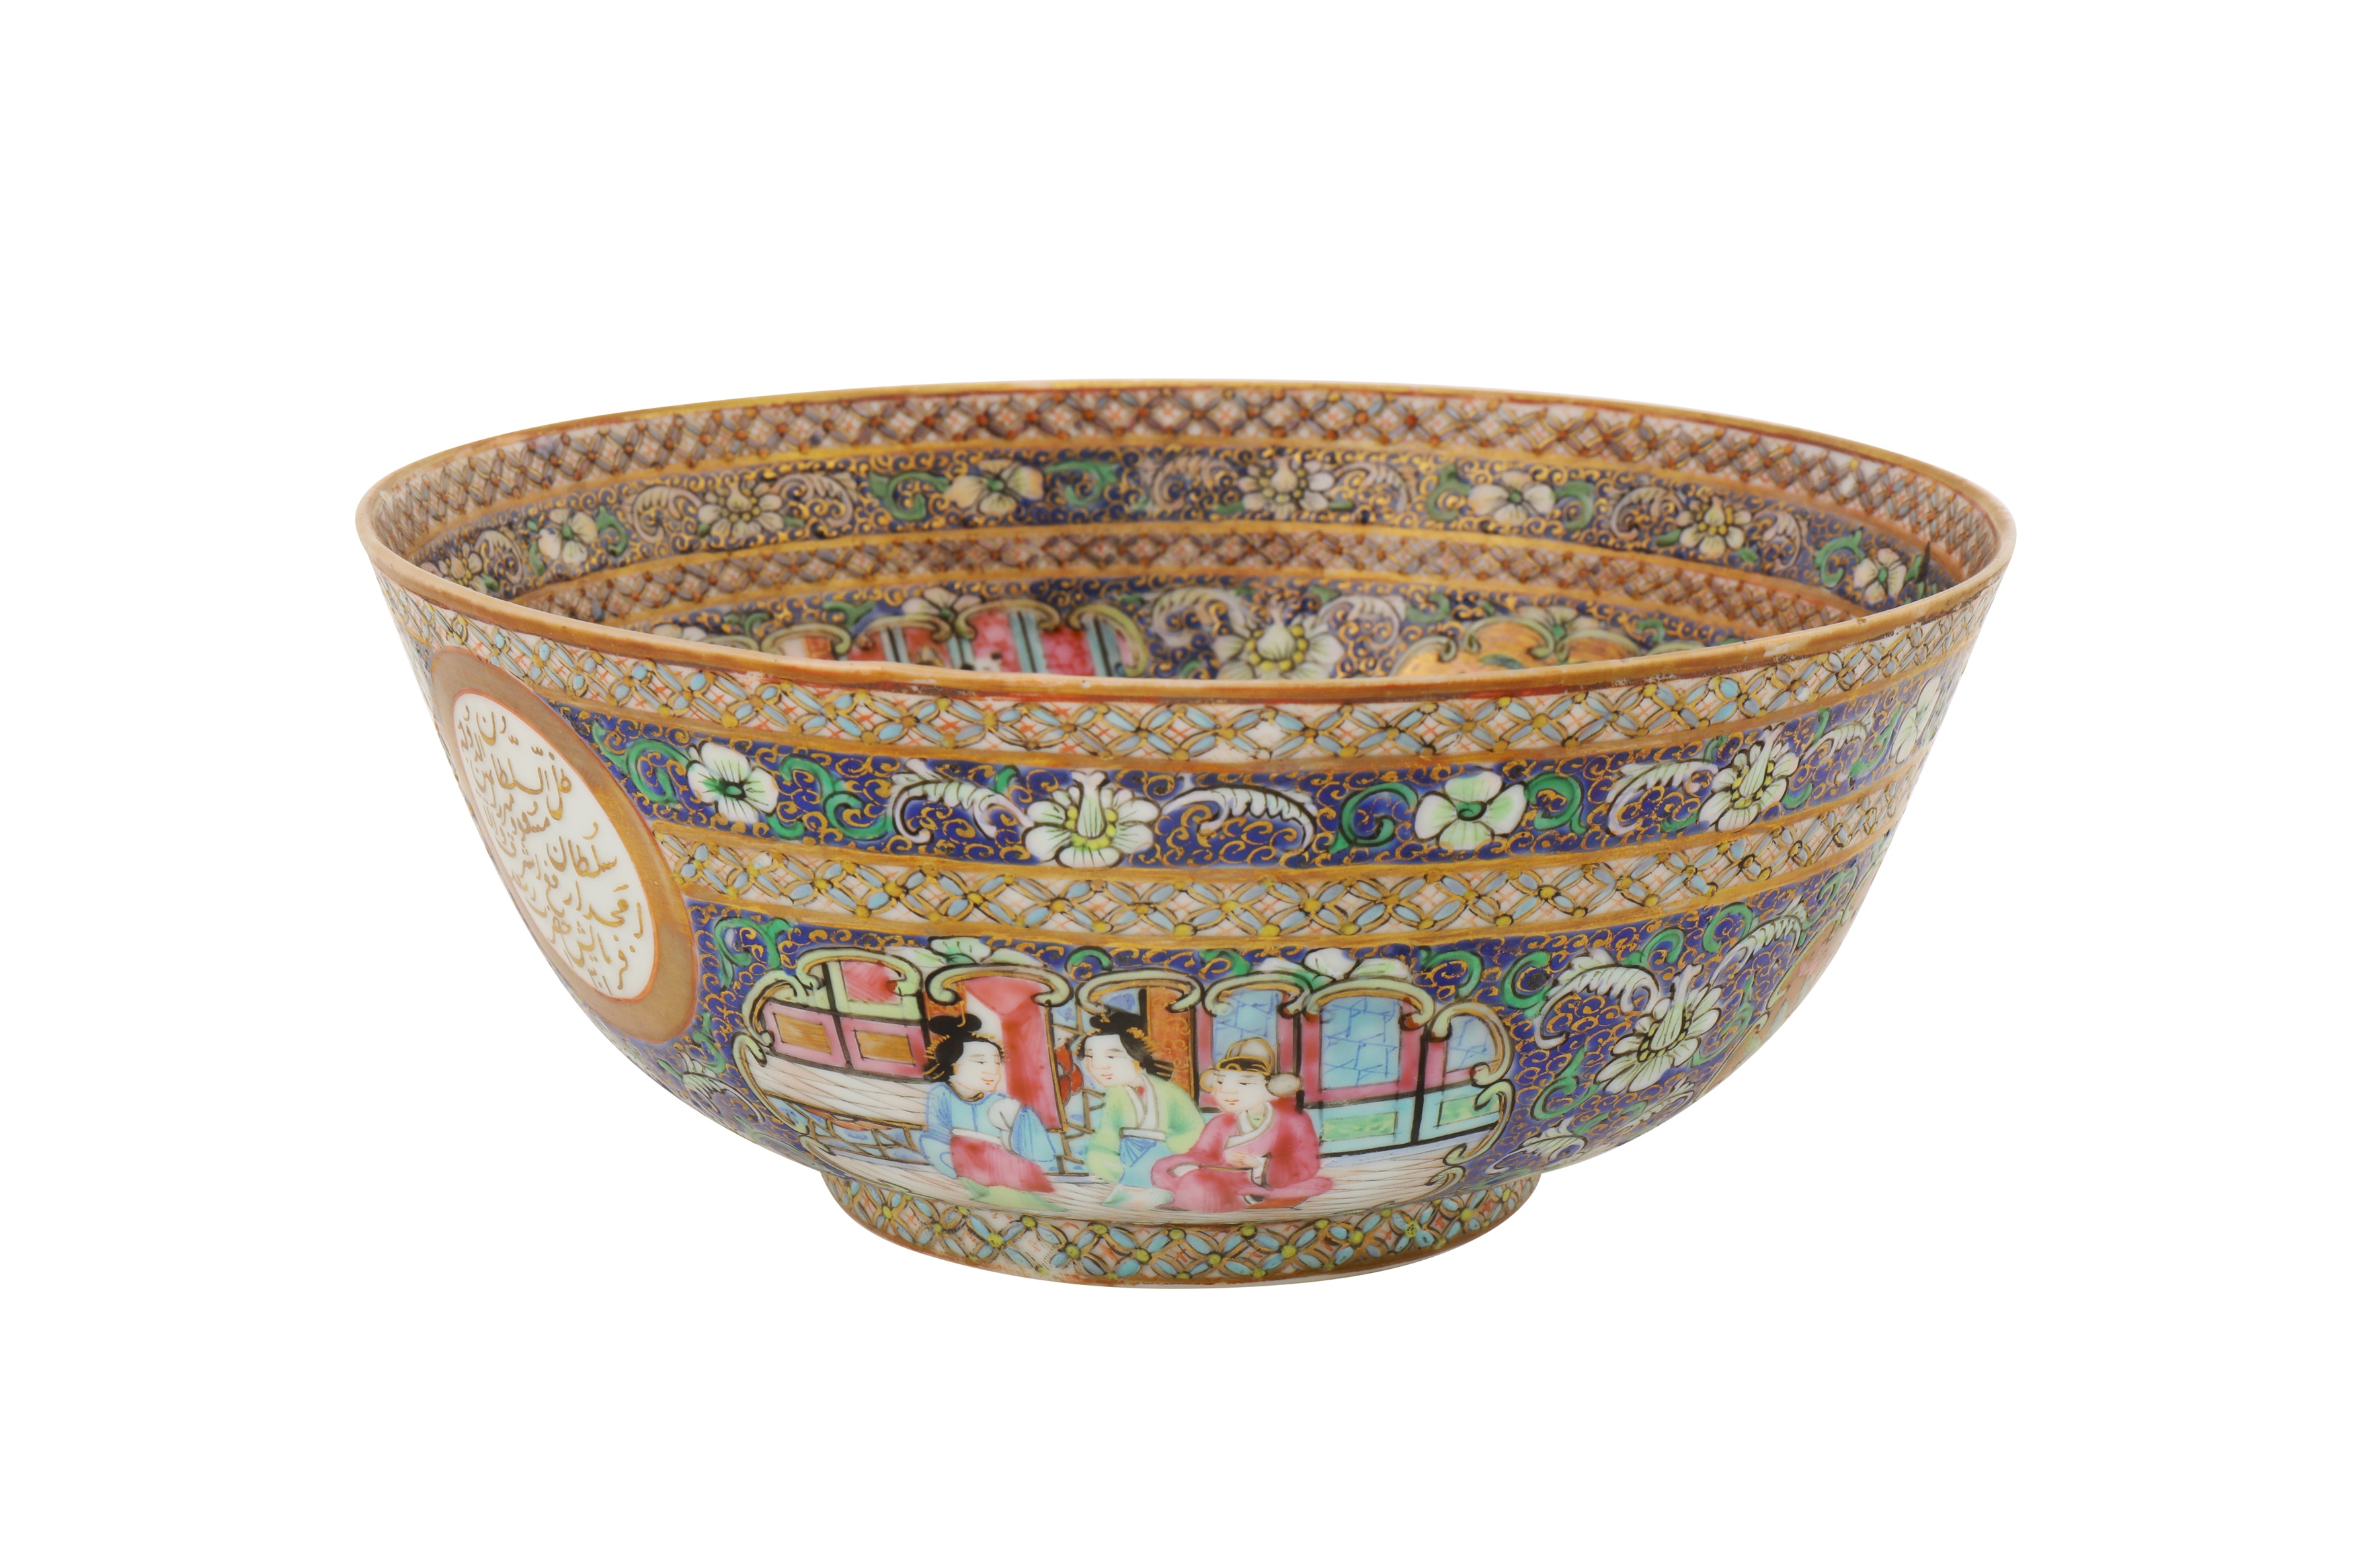 A MEDIUM-SIZED BOWL AND DISH AND SMALLER BOWL FROM THE ZILL AL-SULTAN CANTON PORCELAIN SERVICE - Image 13 of 17